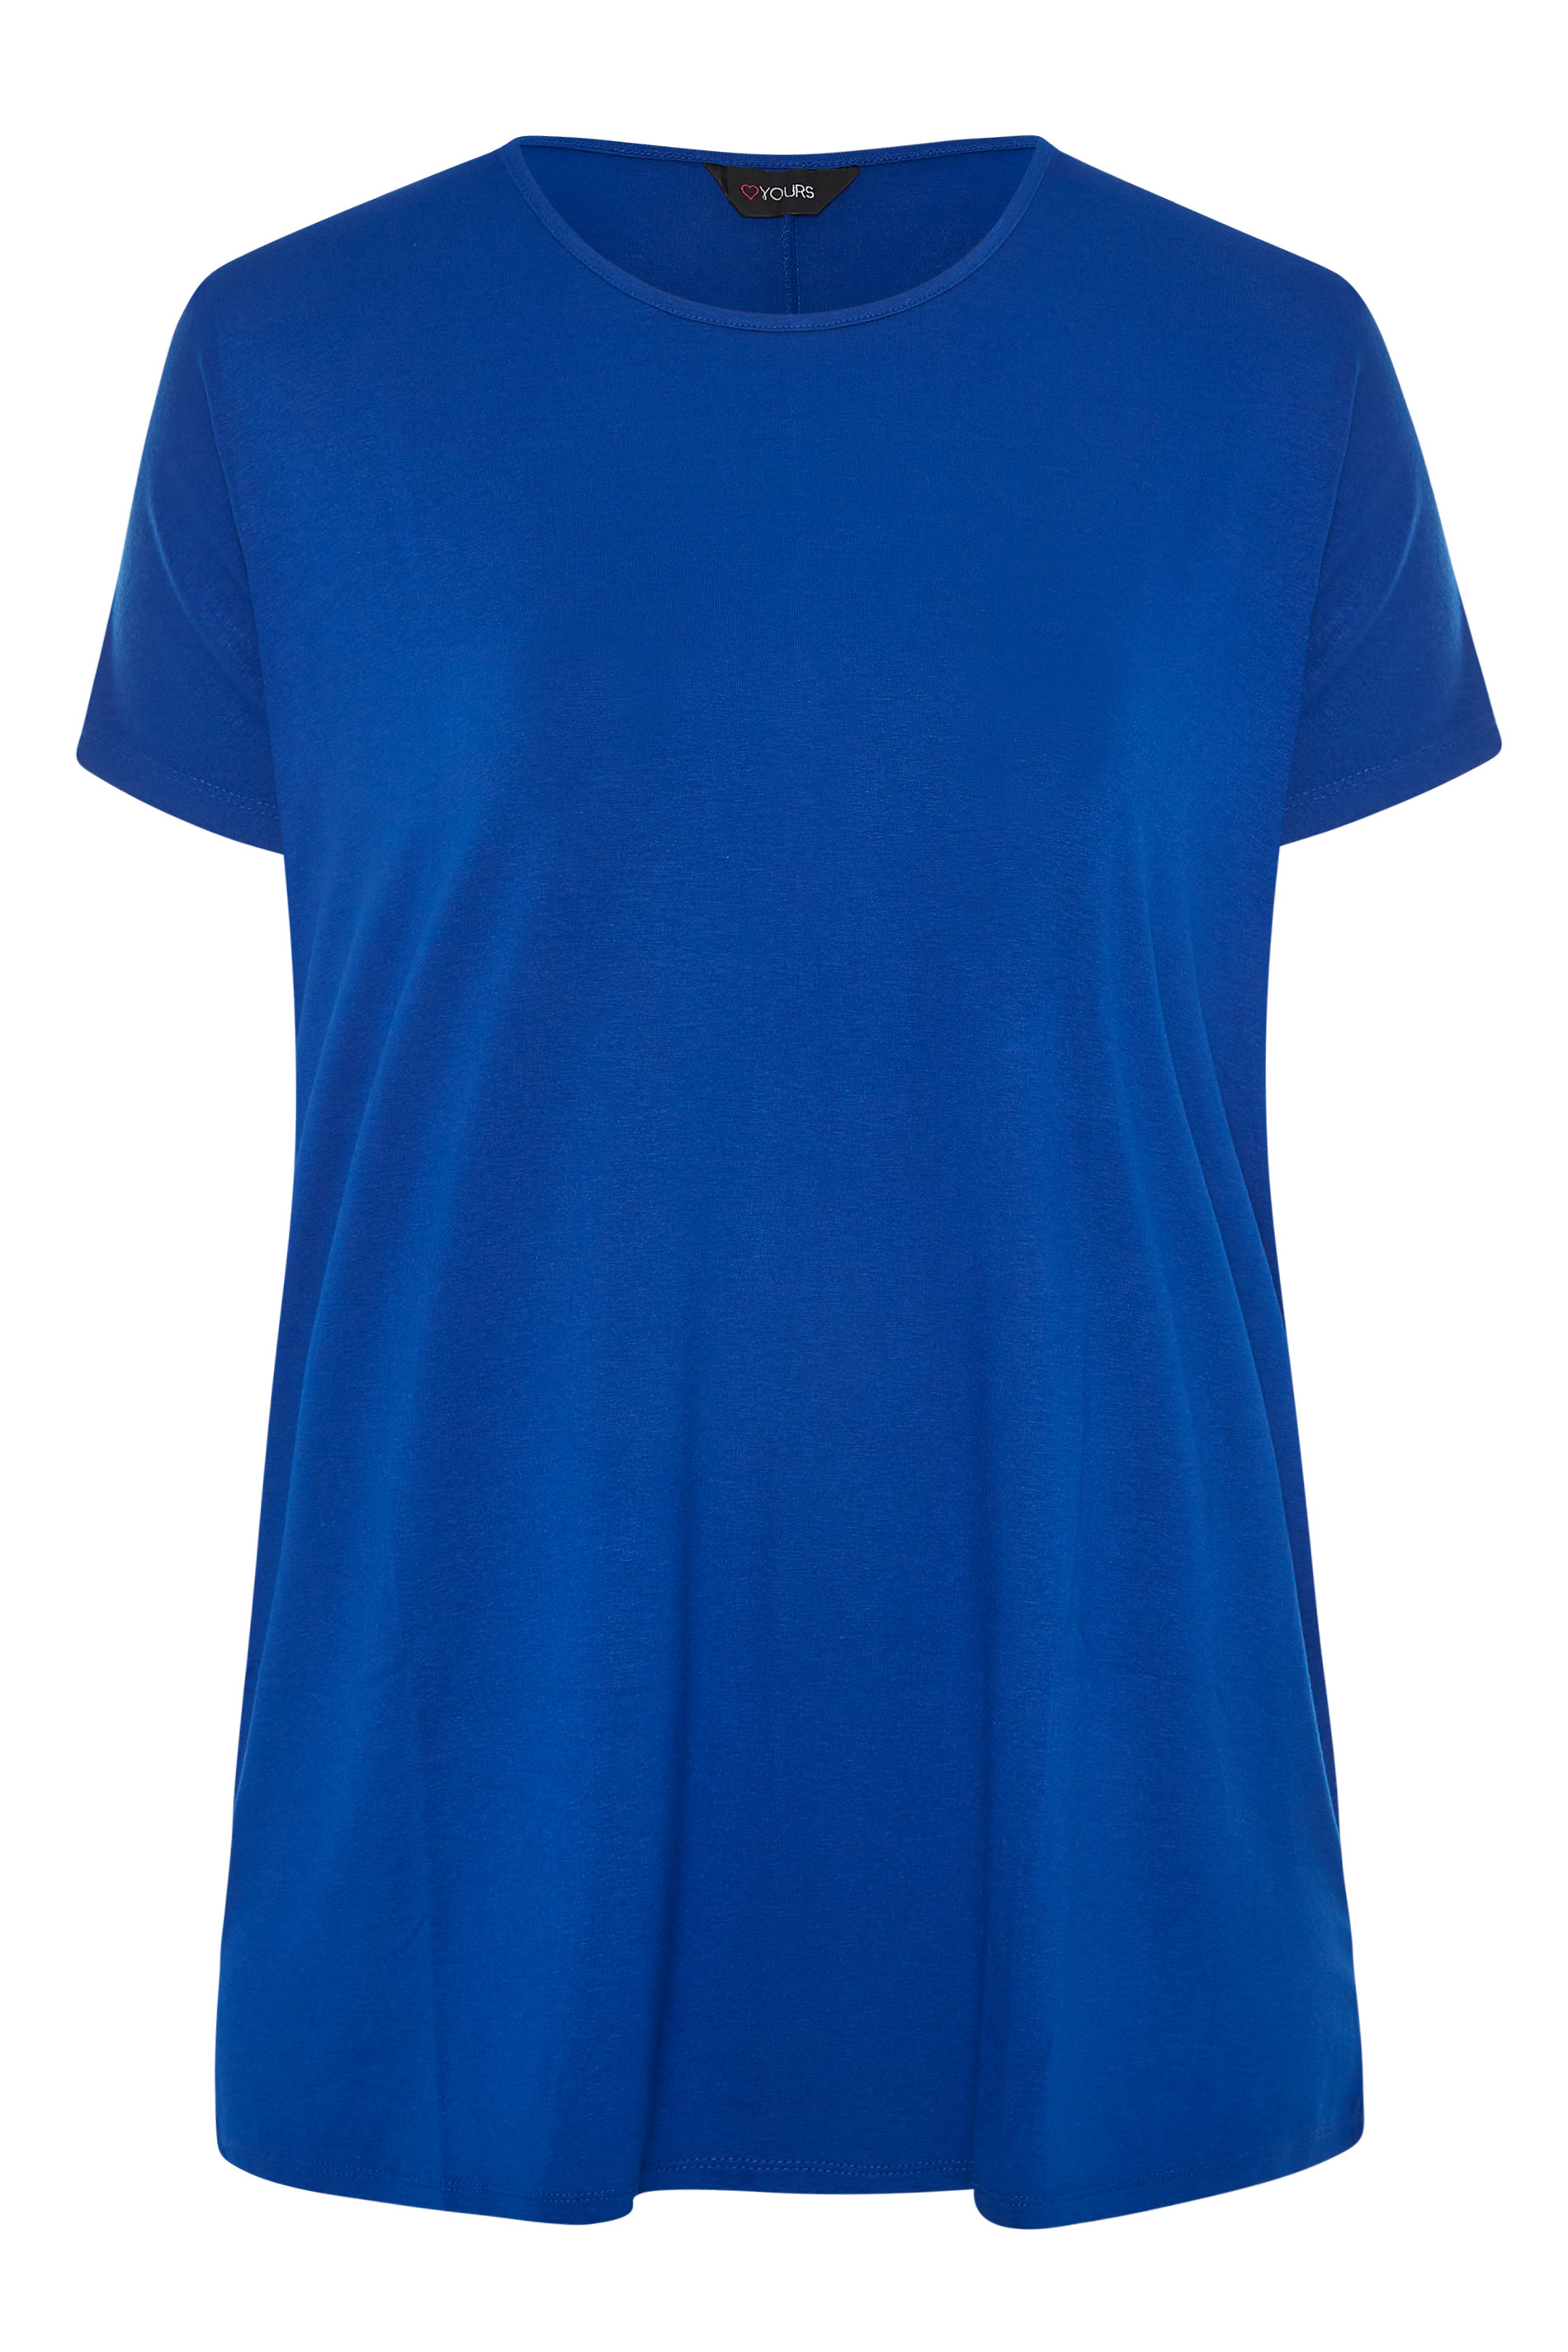 Grande taille  Tops Grande taille  T-Shirts | T-Shirt Bleu Roi Ourlet Plongeant - IV94634